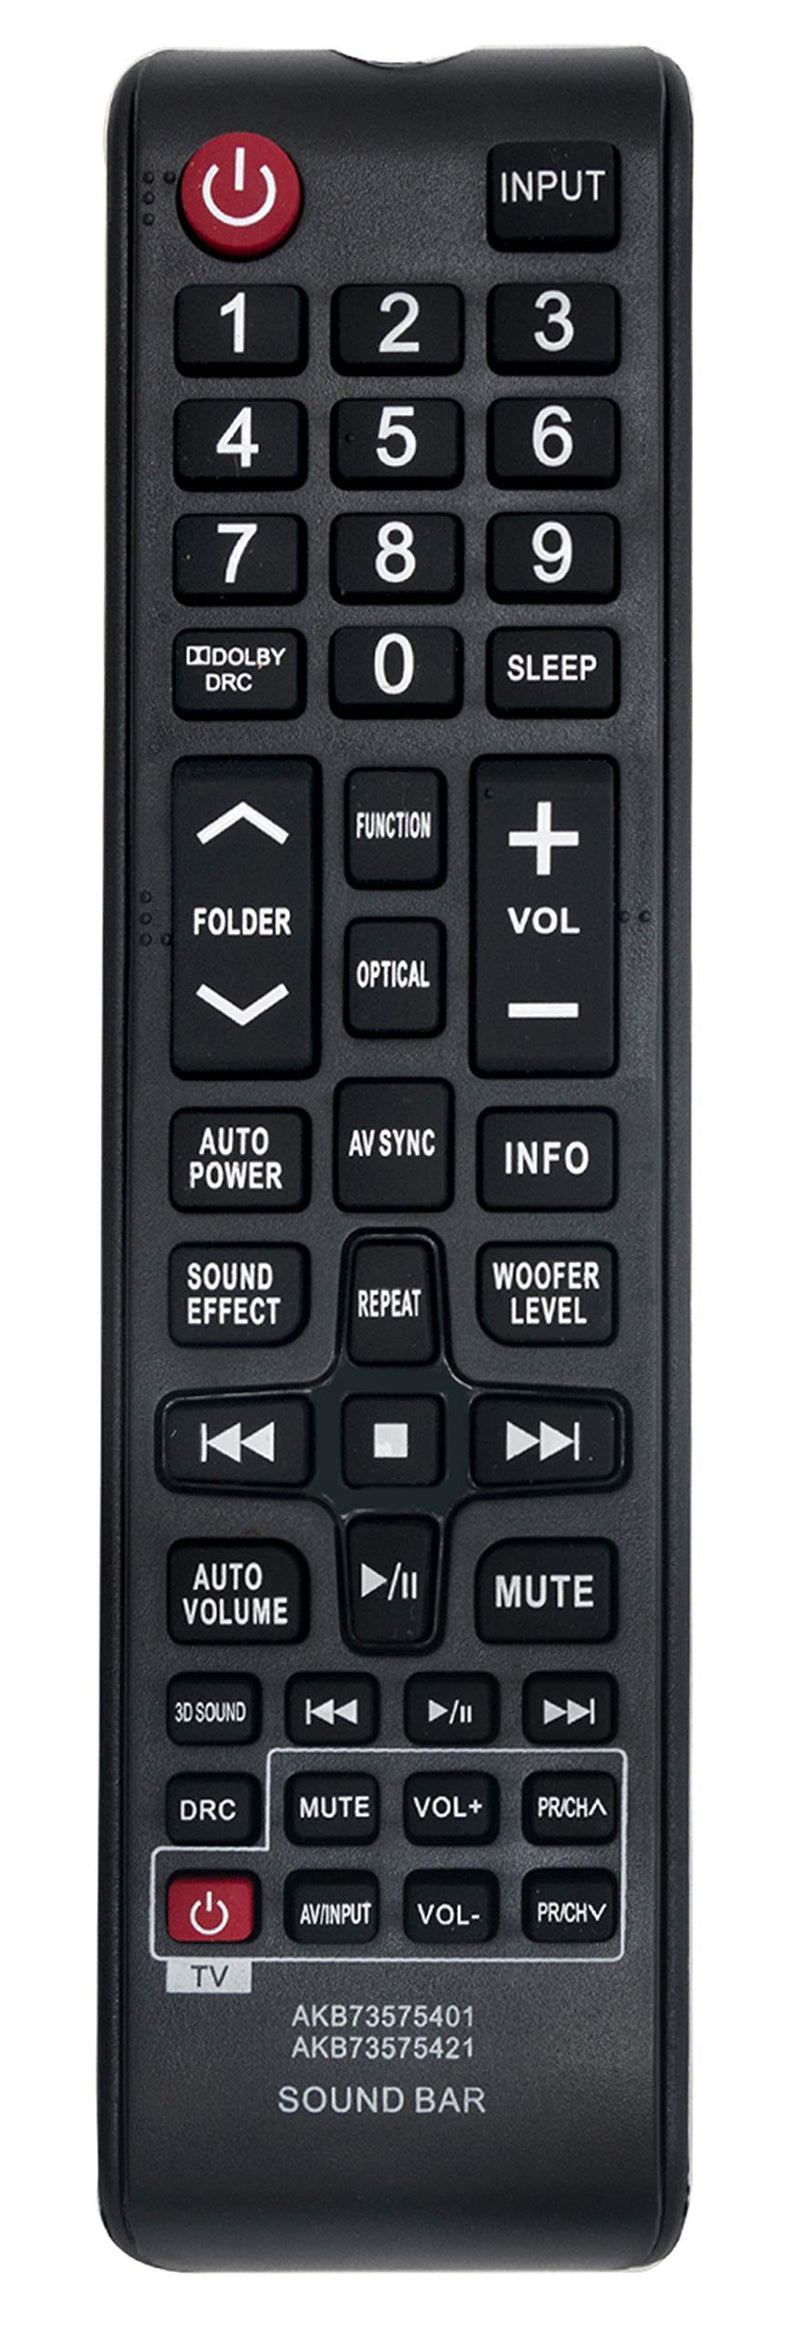 AKB73575421 AKB73575401 Replace Remote fit for LG Home Theater Soundbar NB3532A NB3530ANB NB4530B NB2520A NB3520A NB3520A NB2338A NB3740A NB3520A NB3520ANB NB2420A NB3250A NB3250A